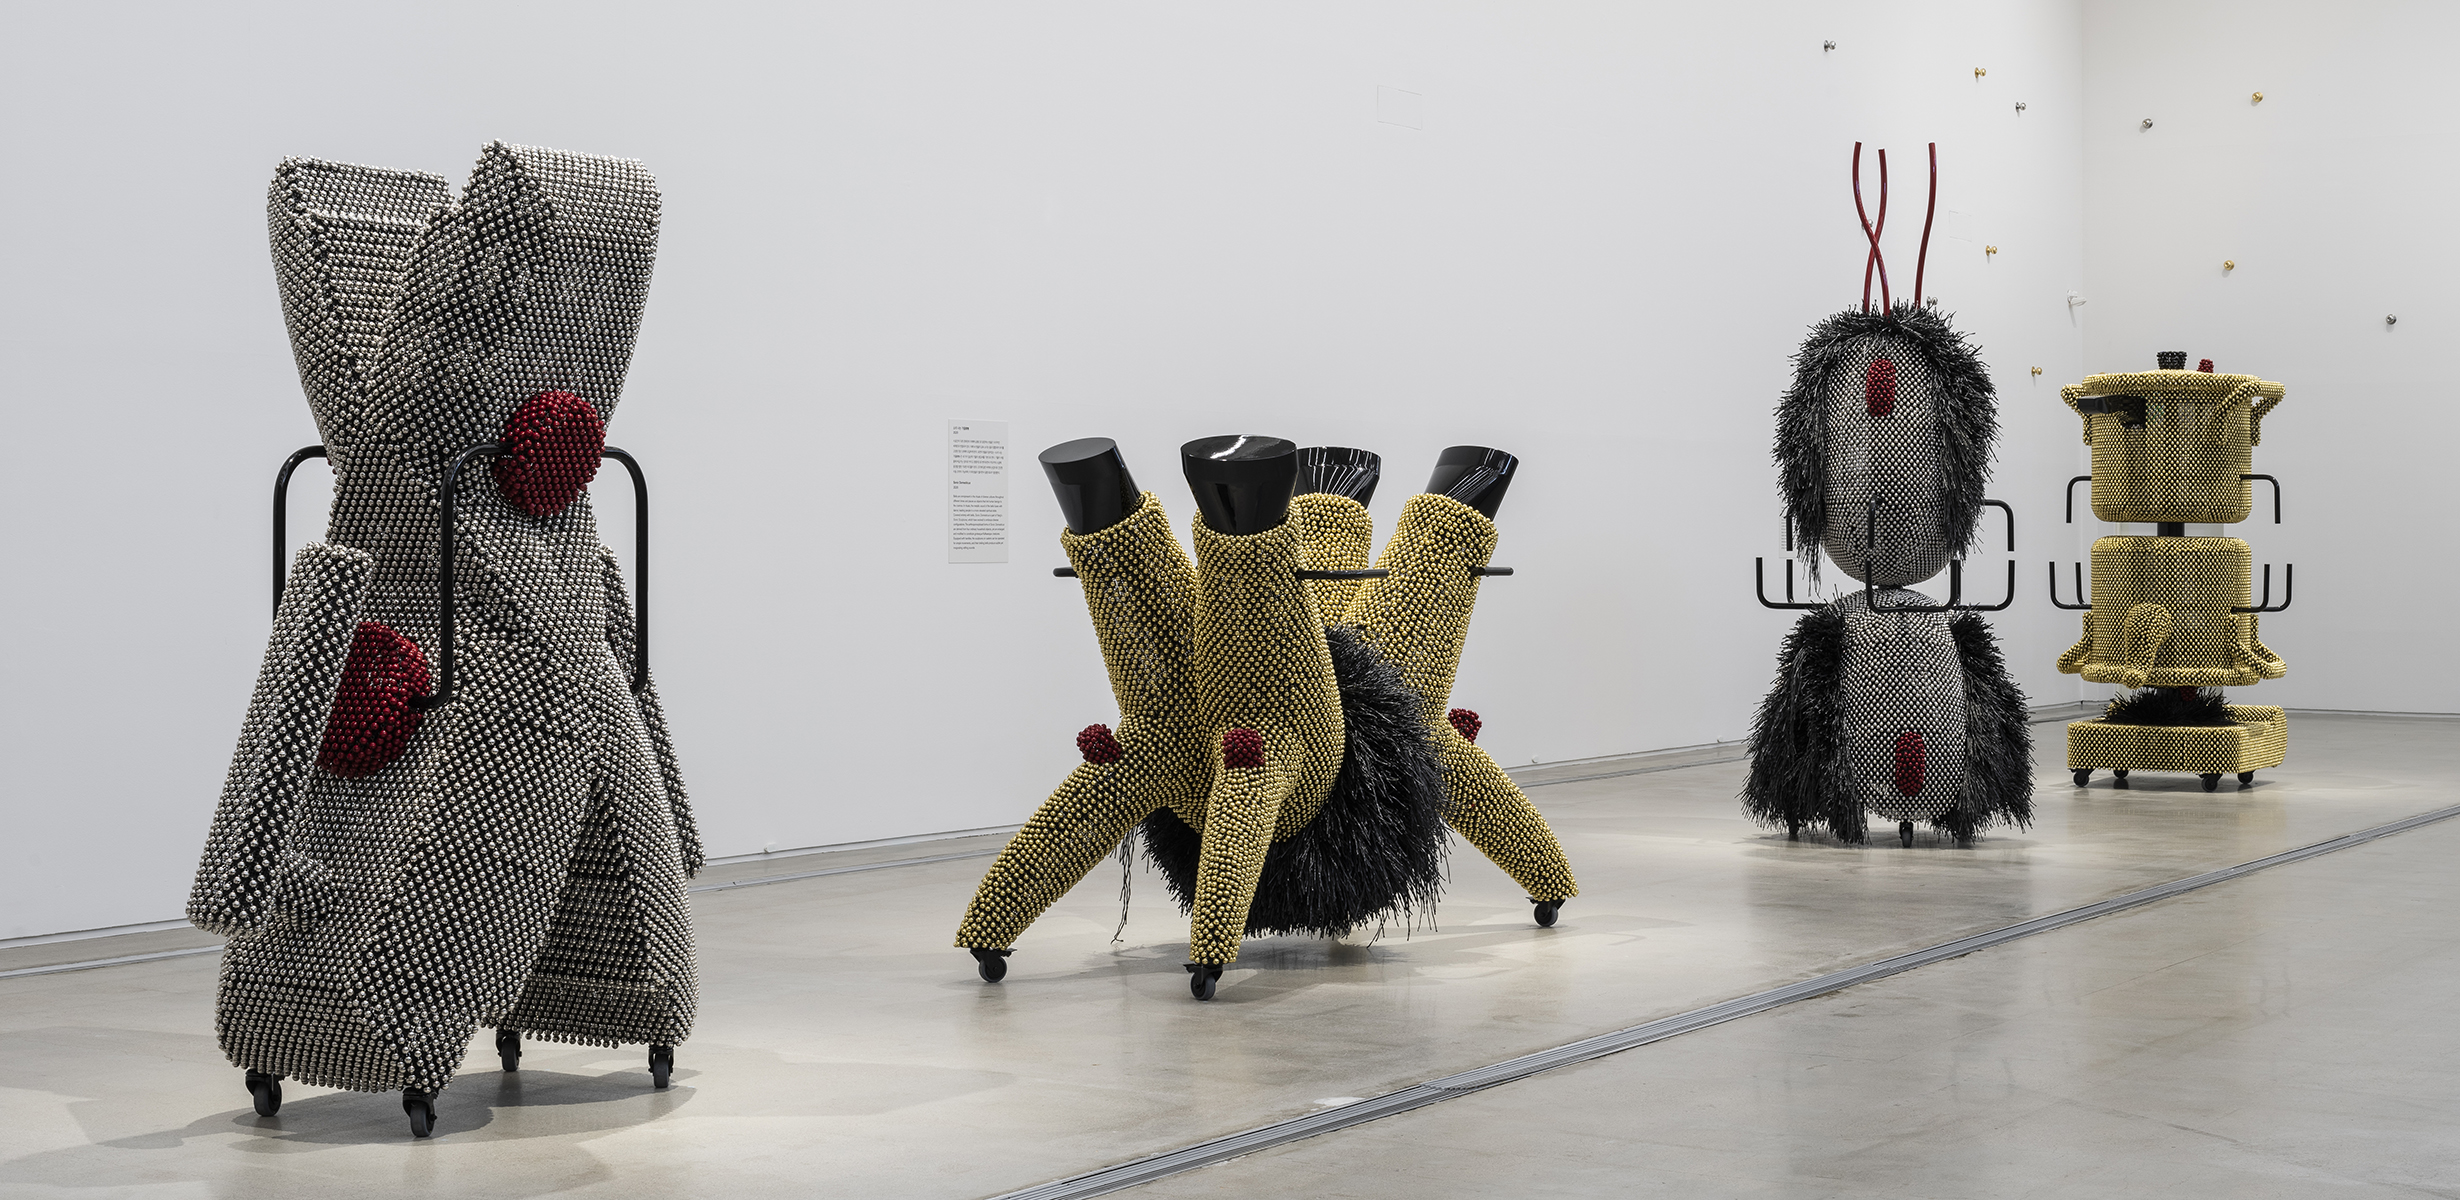 Haegue Yang’s Uncanny Sculptures Lure You In - ArtReview